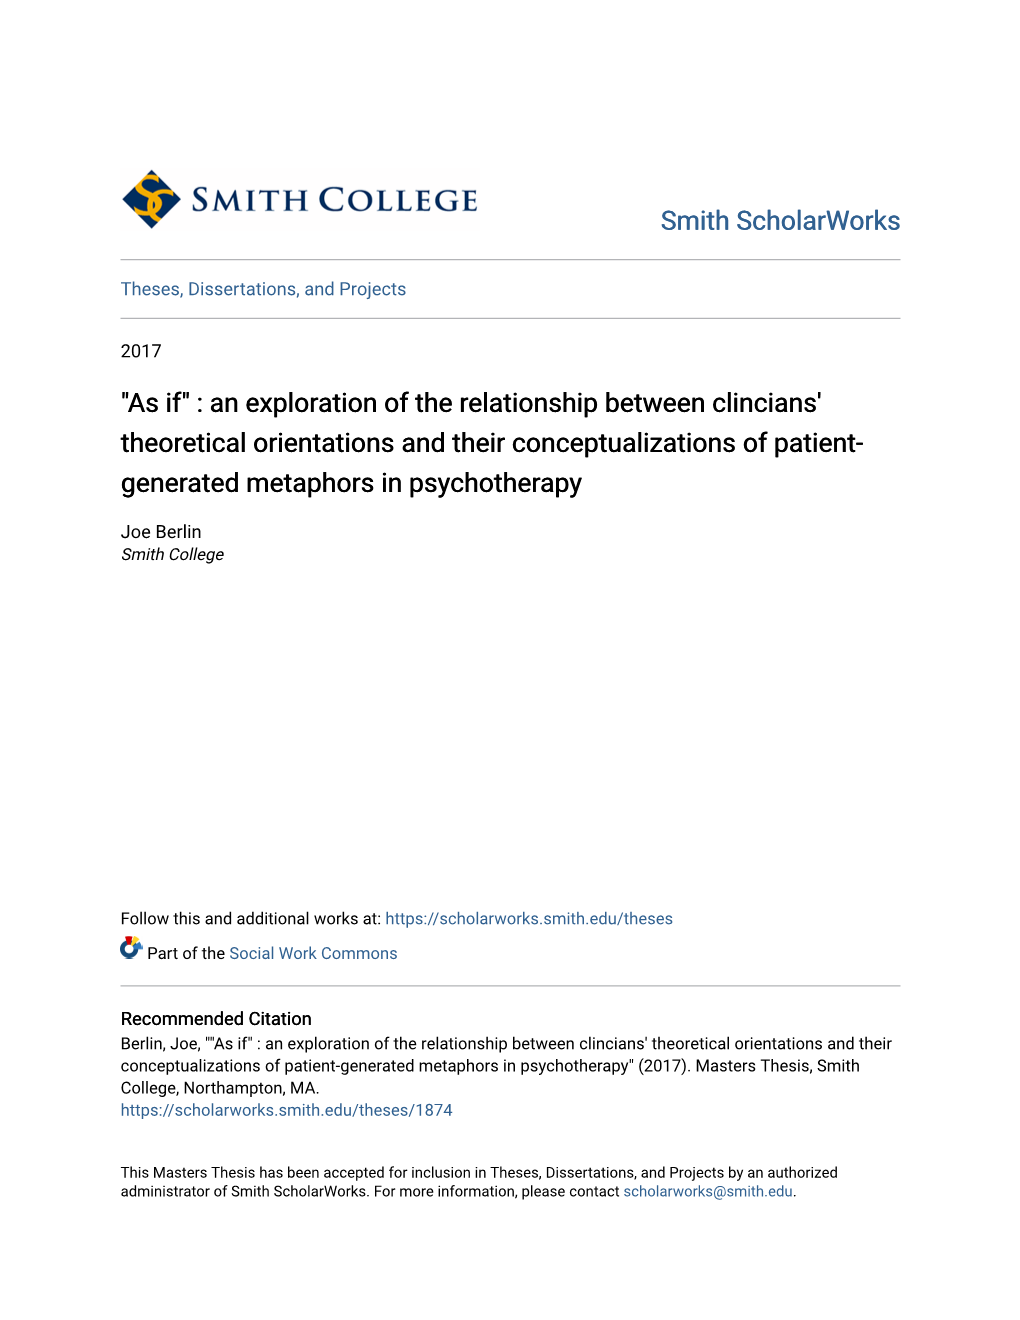 An Exploration of the Relationship Between Clincians' Theoretical Orientations and Their Conceptualizations of Patient- Generated Metaphors in Psychotherapy